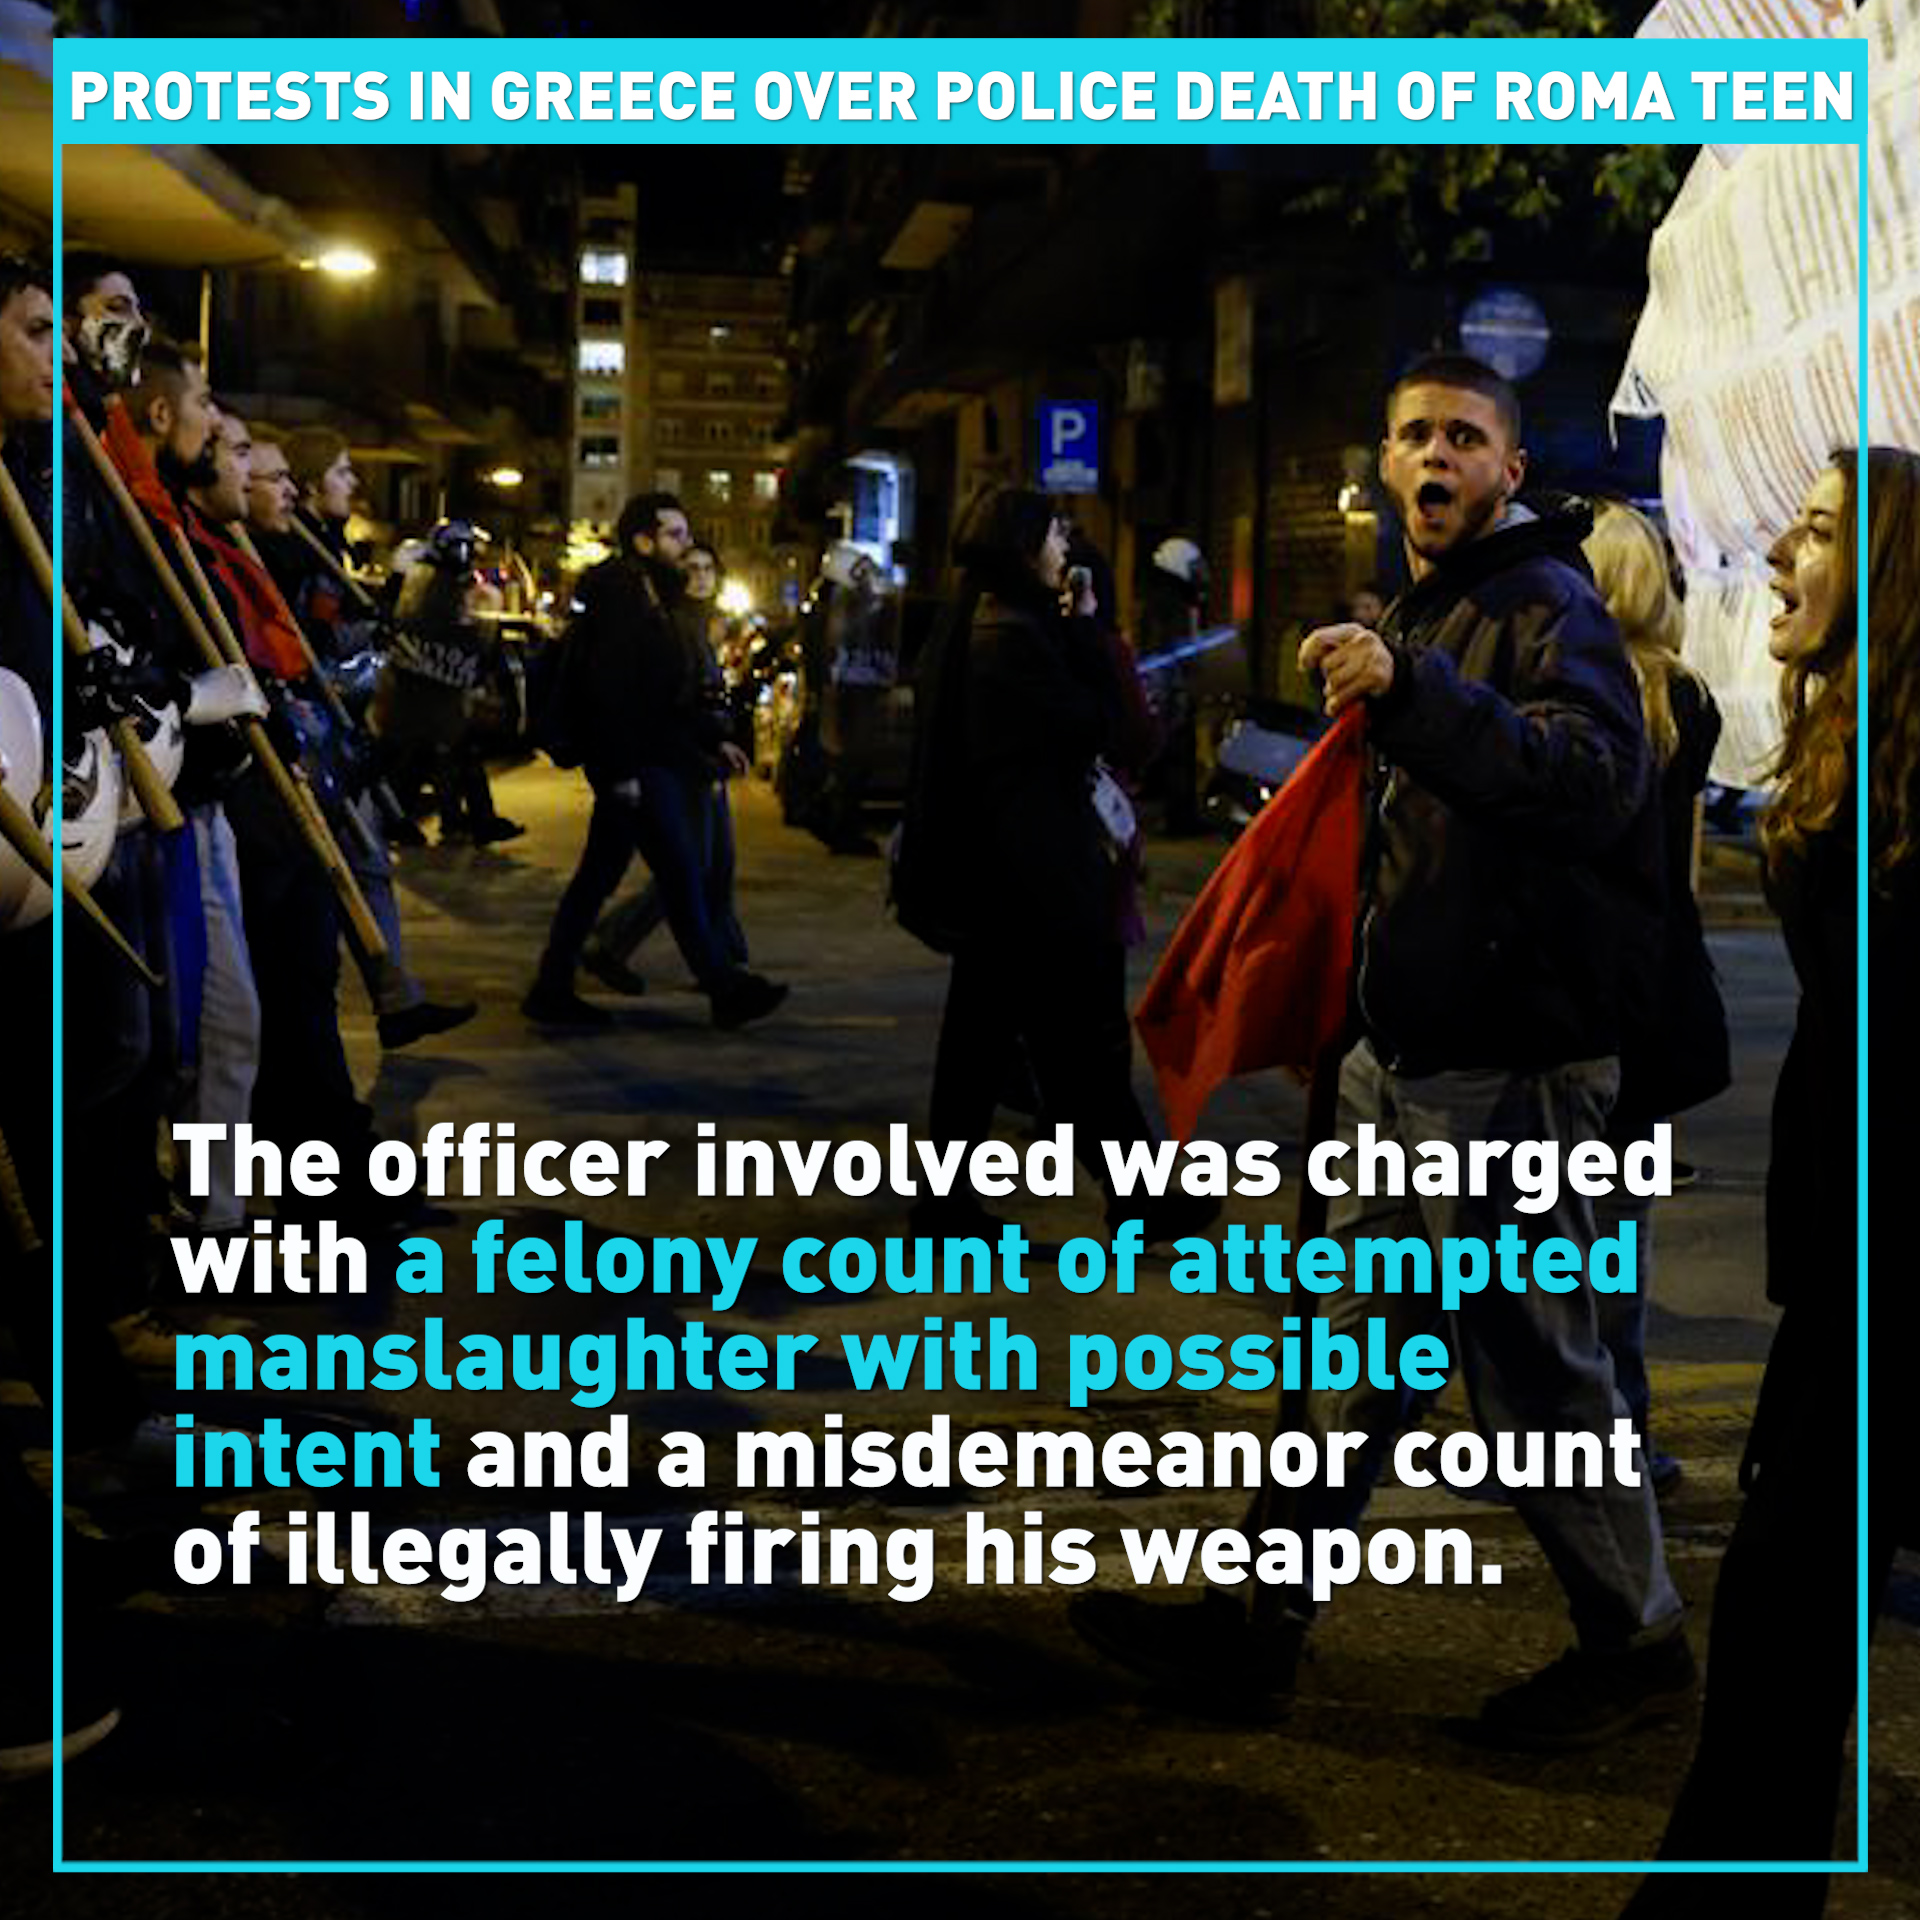 Protests in Greece over police death of Roma teen